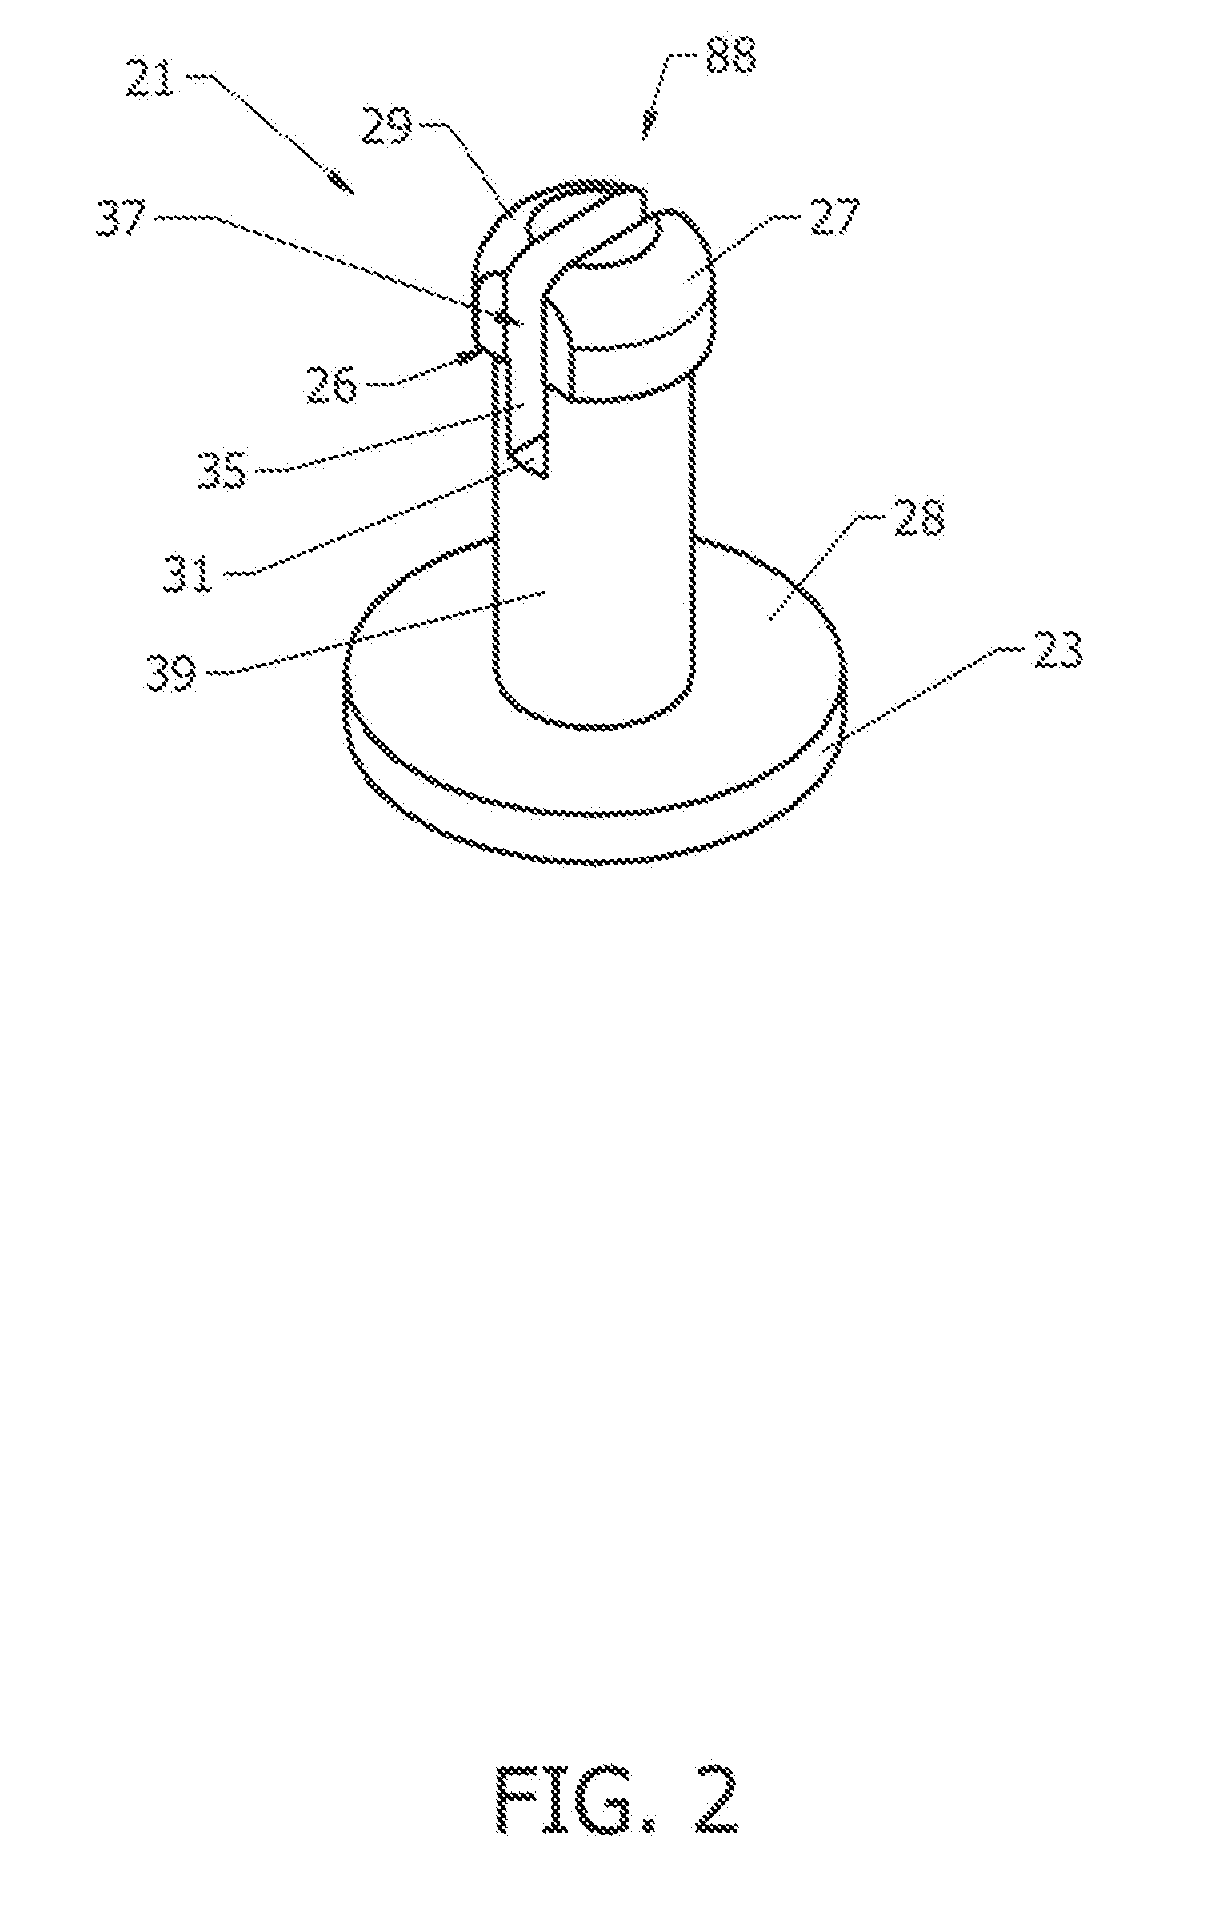 Device for Aseptically Connecting Large Bore Tubing